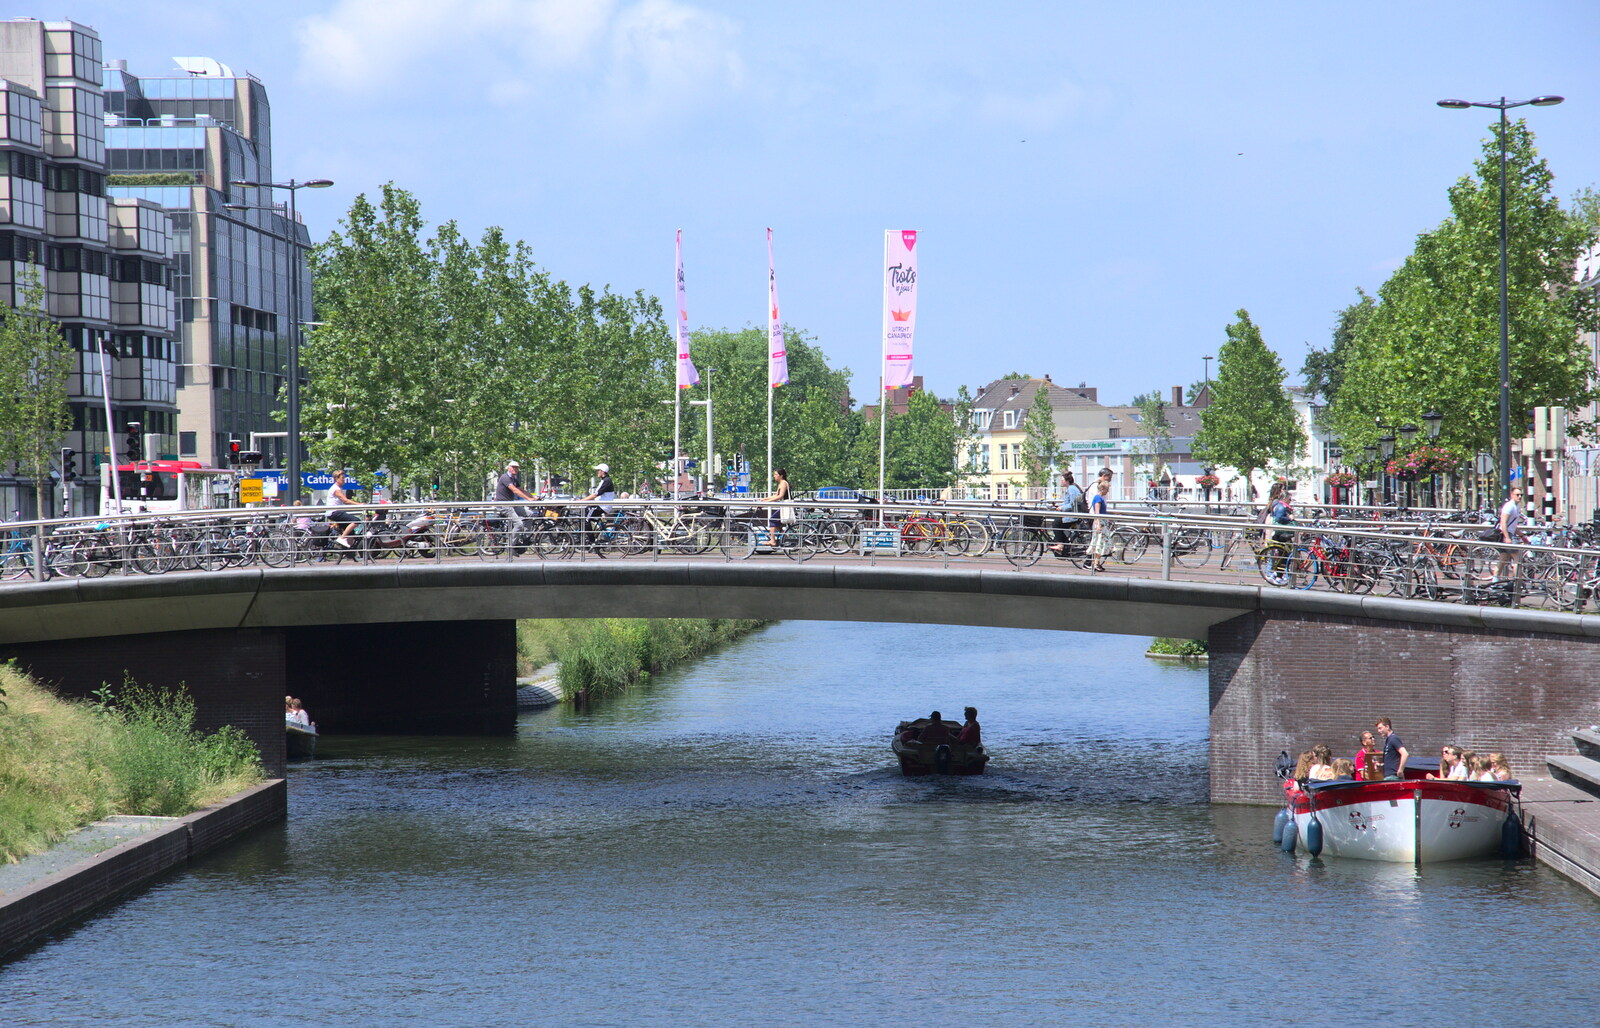 Another bridge of bikes over a canal from A Postcard from Utrecht, Nederlands - 10th June 2018